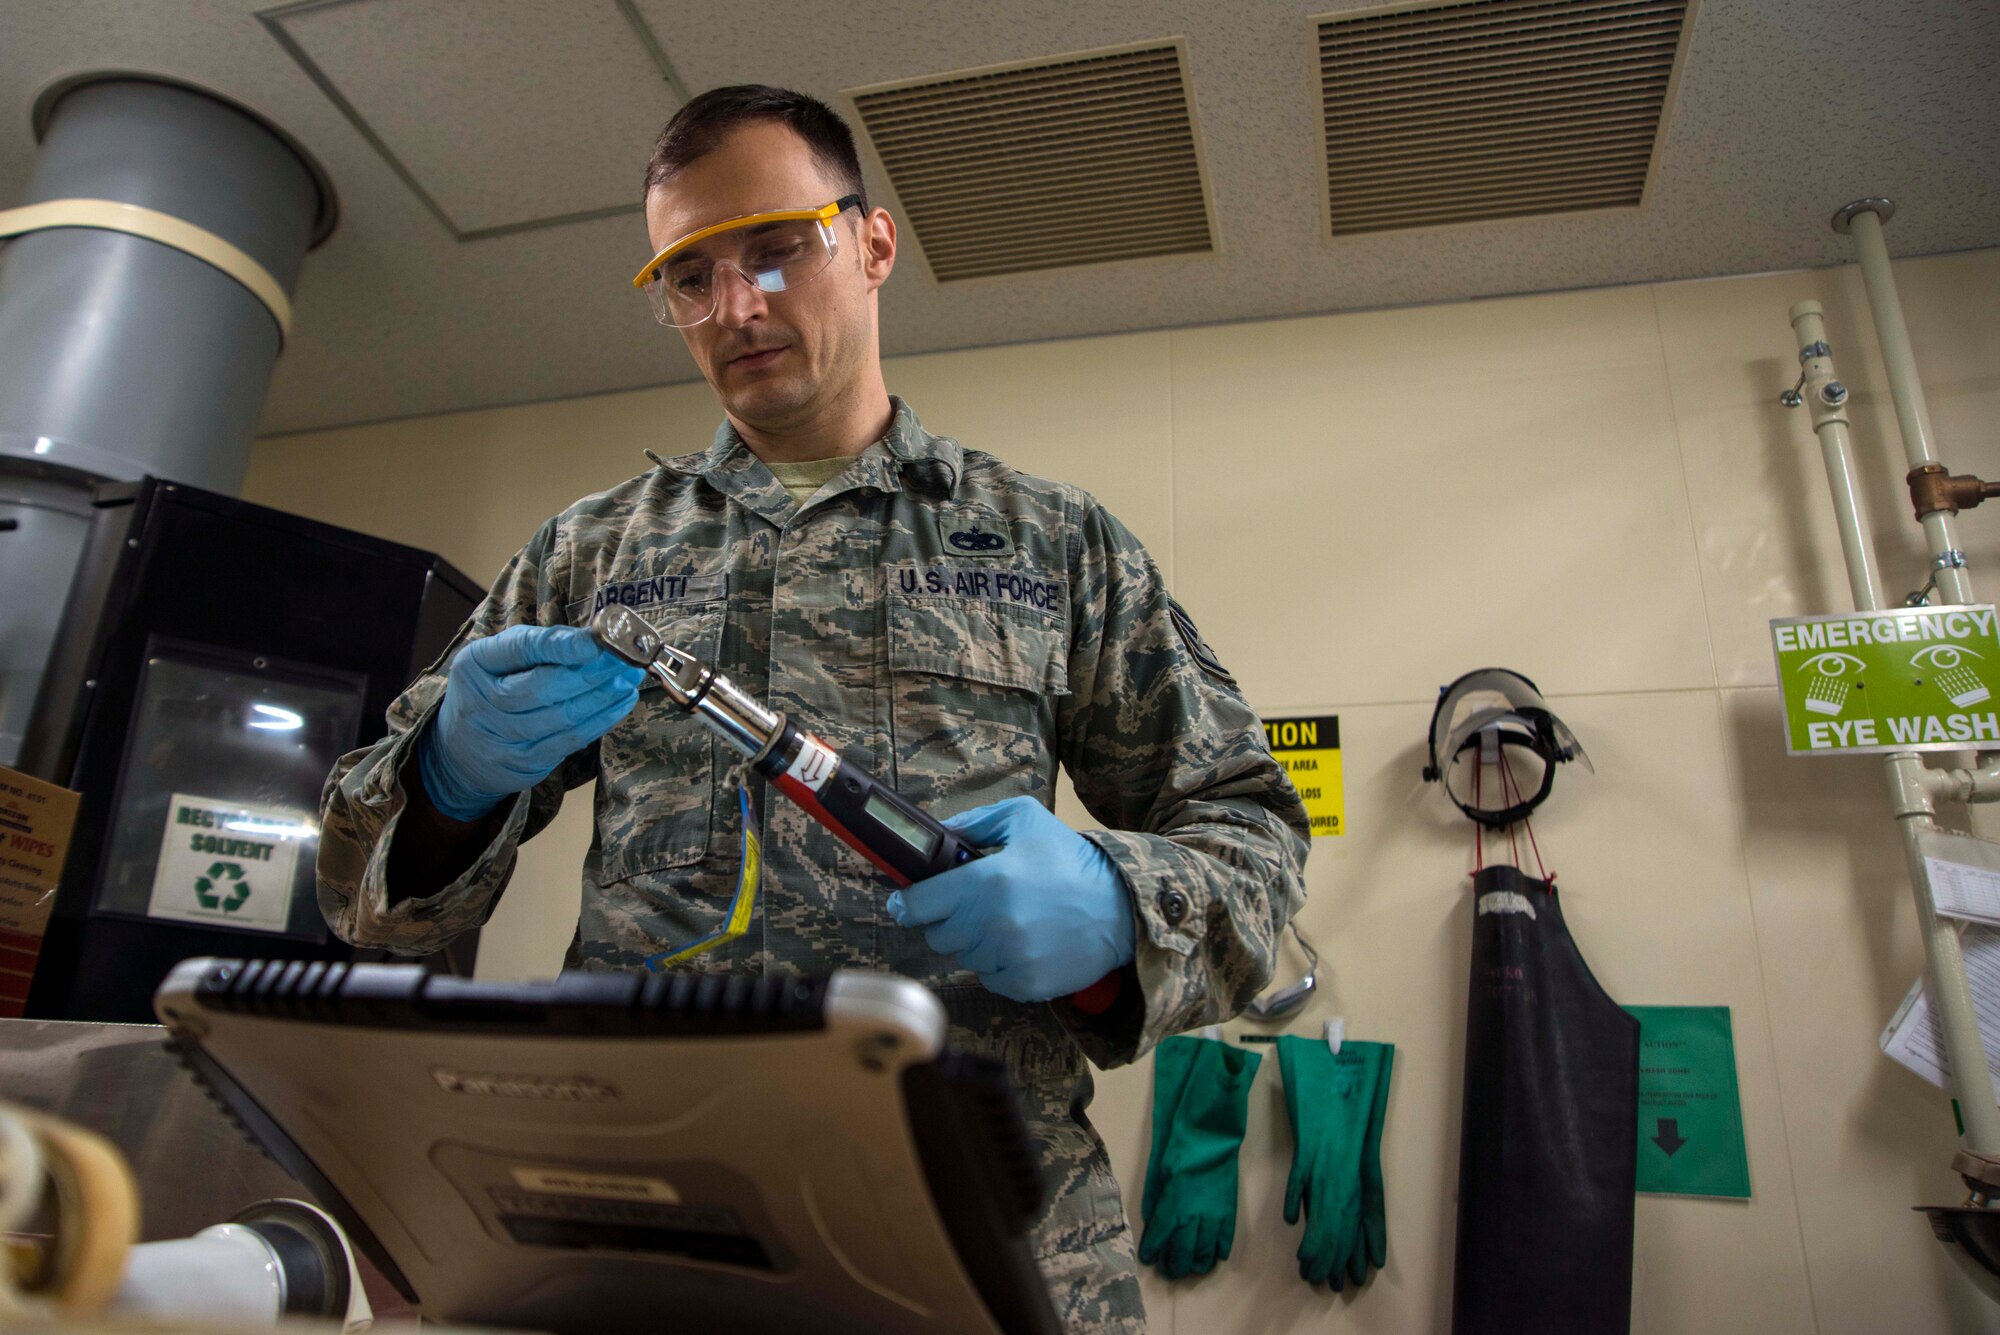 Staff Sgt. Brian Argenti, assigned to the 35th Maintenance Squadron, prepares for a calibration test March 31, 2015, at Misawa Air Base, Japan. Argenti works in the hydraulics systems shop where he and co-workers maintain a handful of hydro systems for F-16 Fighting Falcons across the Air Force. (U.S. Air Force photo/Staff Sgt. Derek VanHorn)